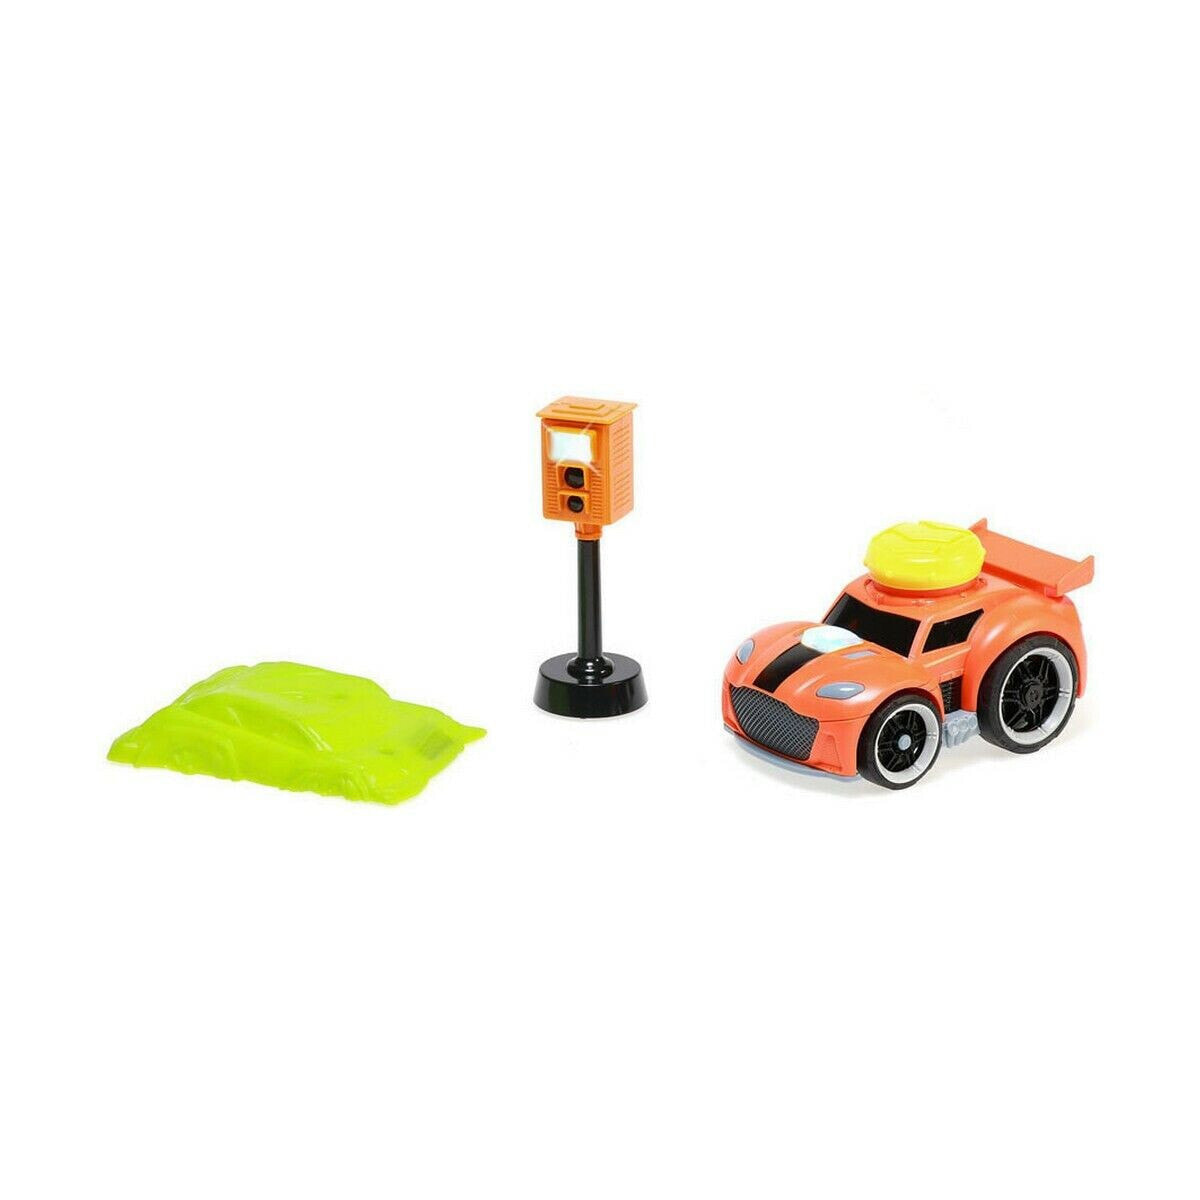 Vehicle Playset Light with sound